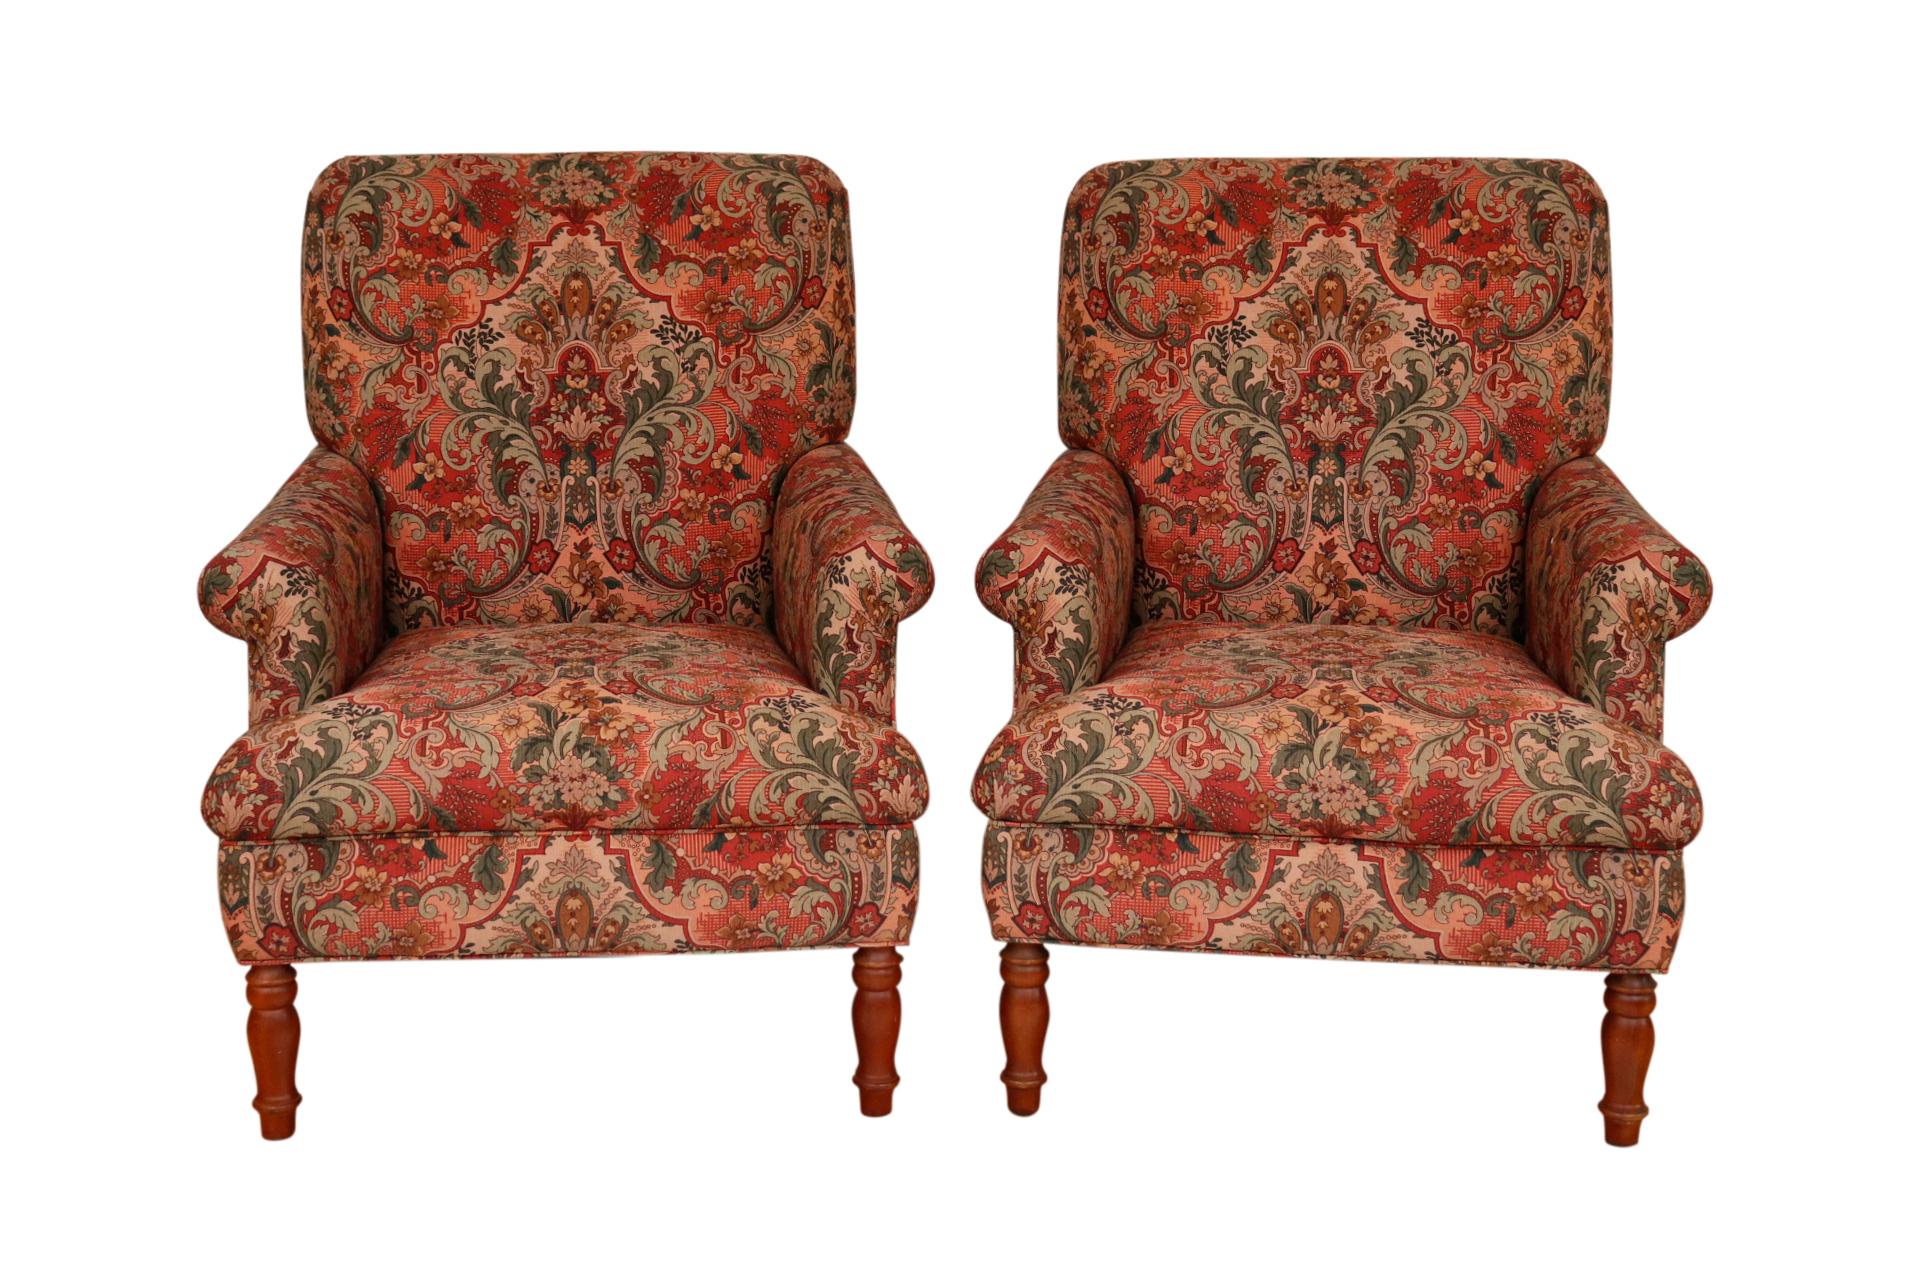 A pair of English style lounge chairs. Upholstered in a rich Ishana style floral printed cotton with bunches of acanthus foliage repeated in red, sage, mocha and olive on a blush ground. The seat back reclines with a flat crest rail and pleated arms